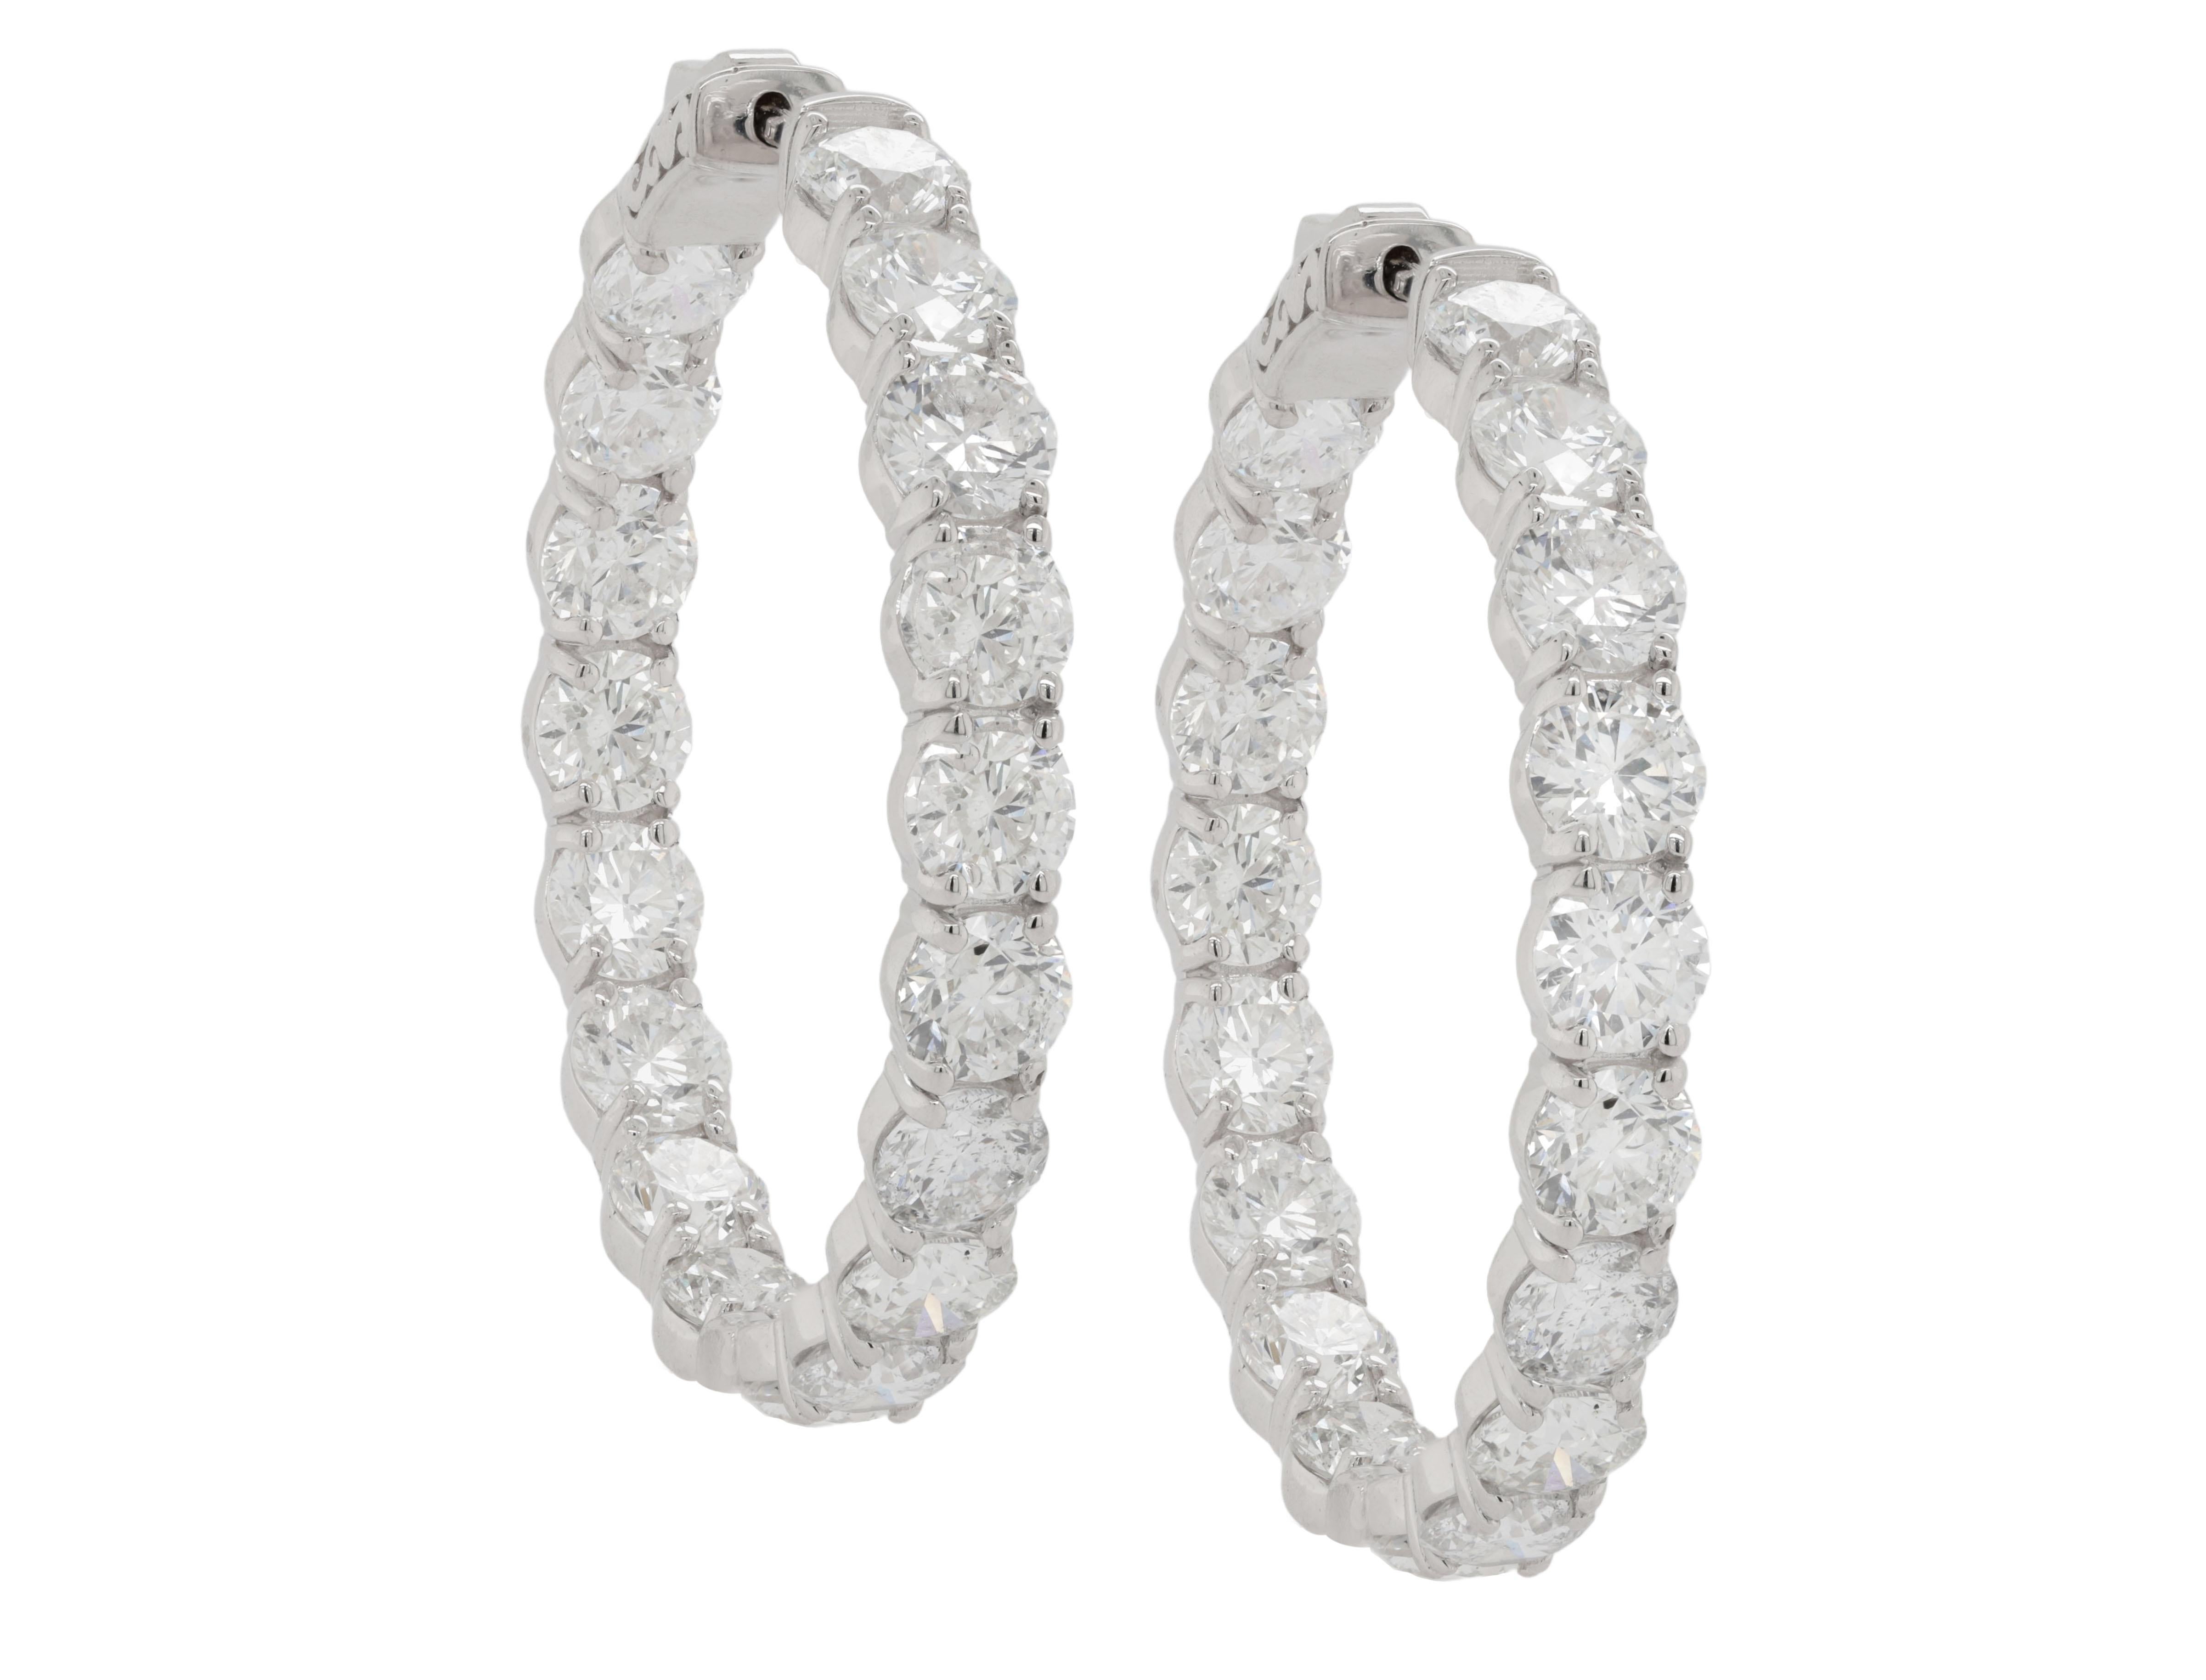 18 kt white gold inside-out hoop earrings adorned with 21.00 cts tw of round diamonds (36 stones)
Diana M. is a leading supplier of top-quality fine jewelry for over 35 years.
Diana M is one-stop shop for all your jewelry shopping, carrying line of